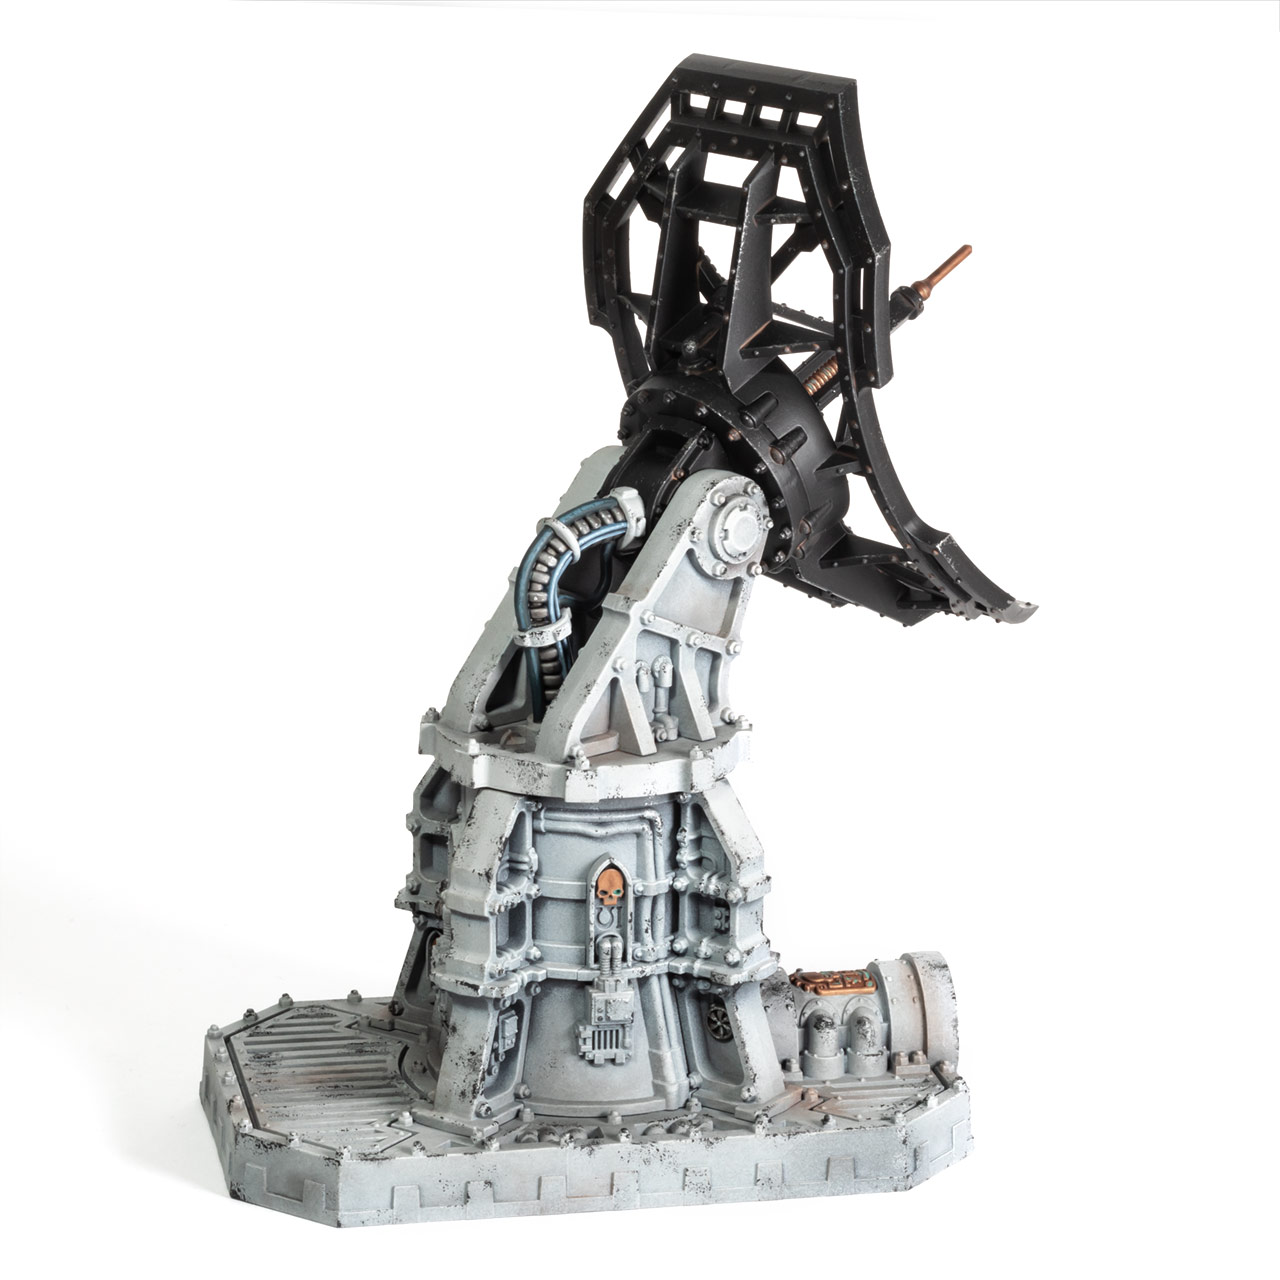 Battlezone Fronteris Auspex Shrine painted by Stahly, back